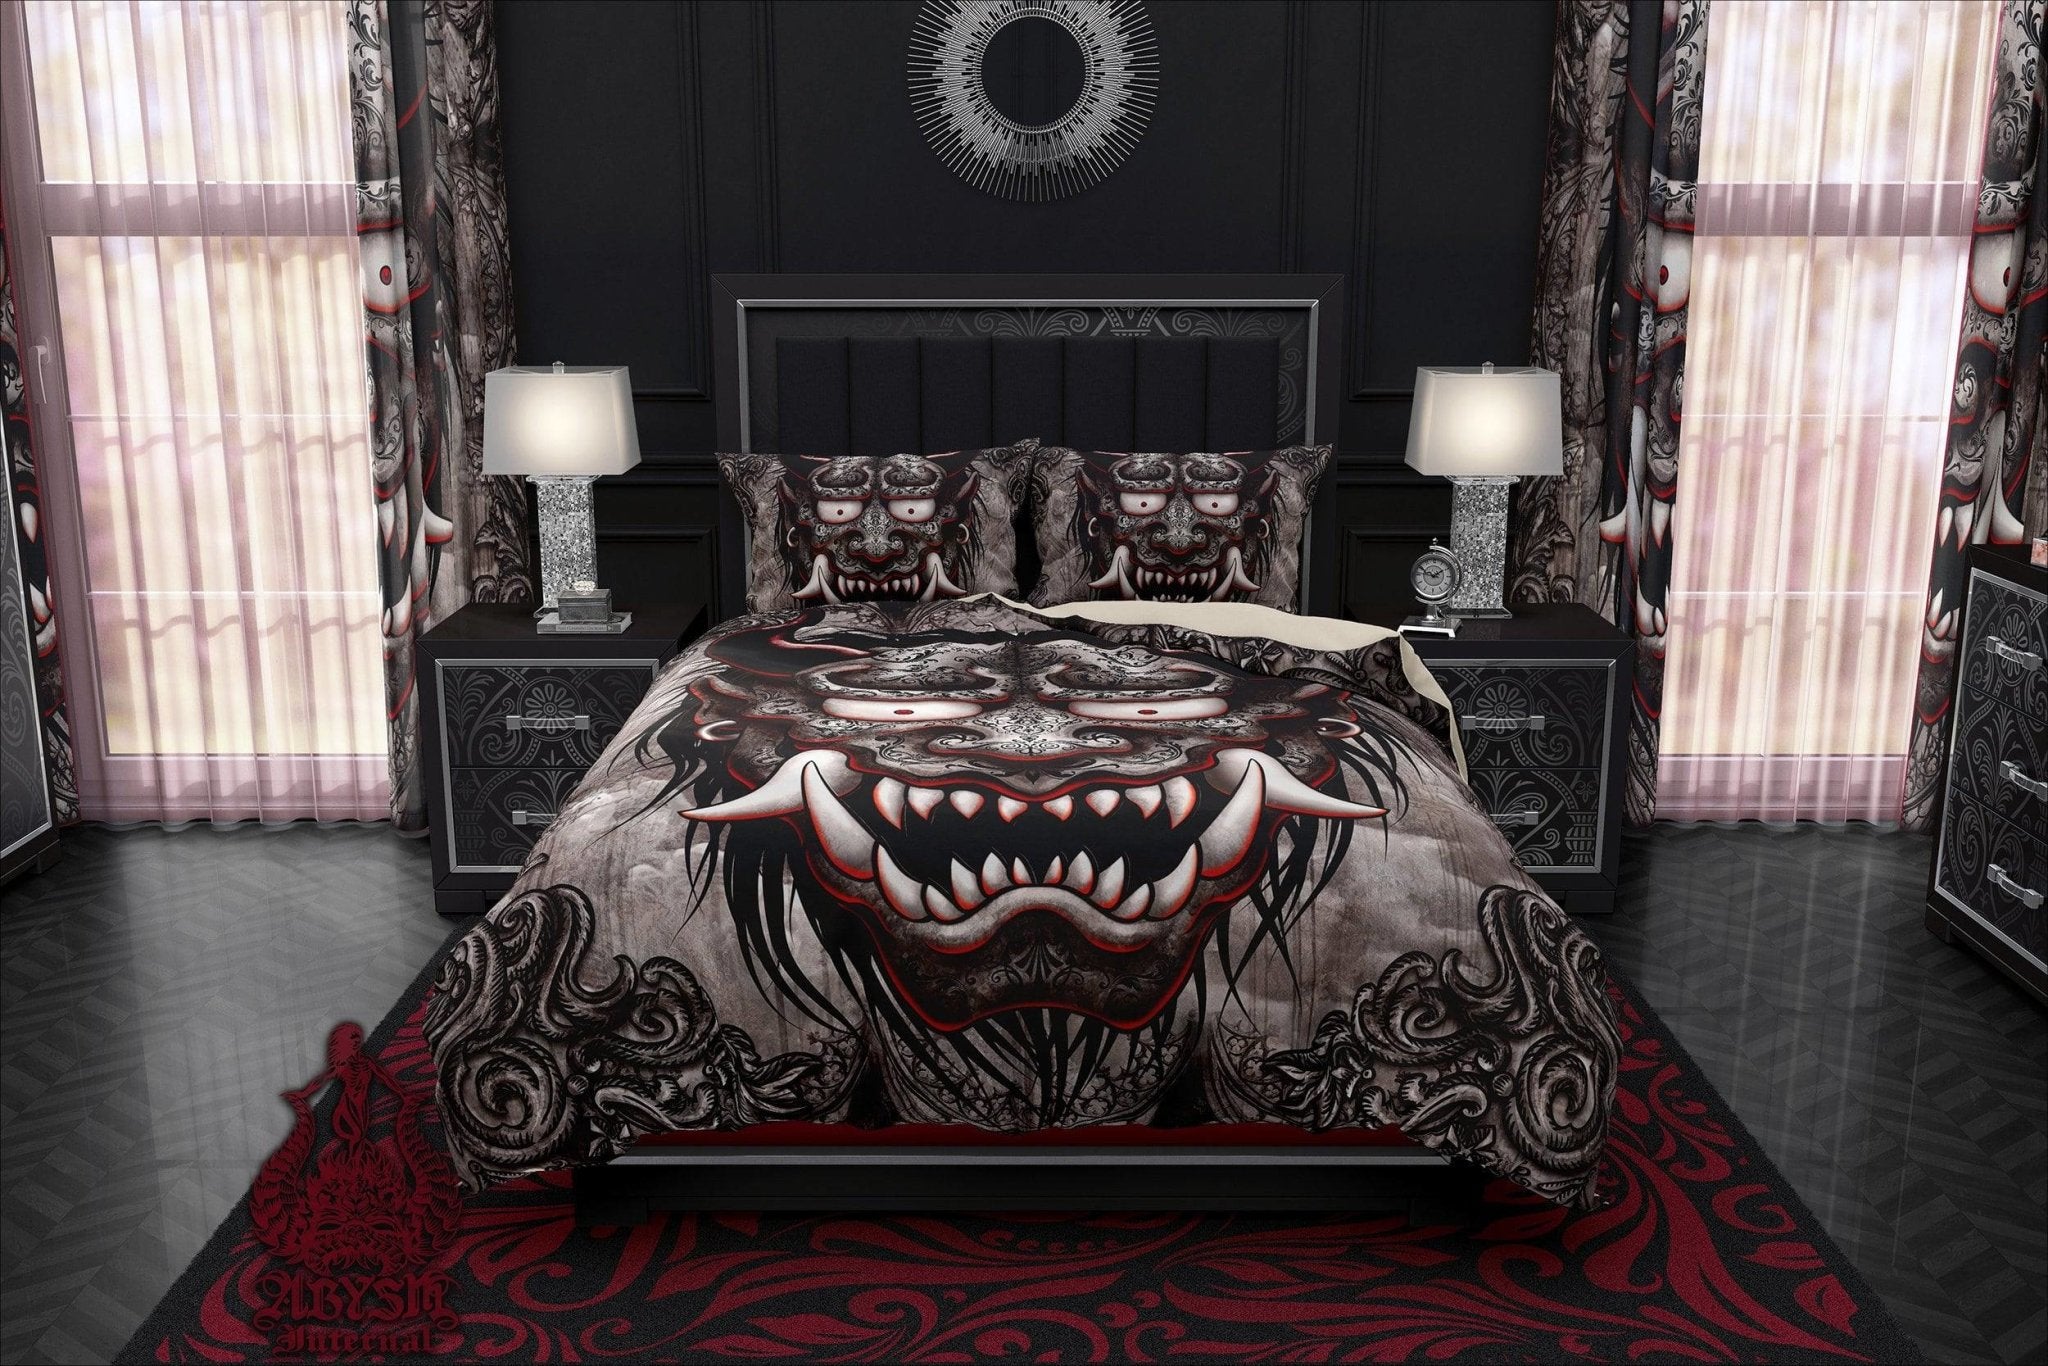 Oni Bedding Set, Comforter and Duvet, Gothic Gargoyle Bed Cover and Bedroom Decor, Japanese Demon, King, Queen and Twin Size - Grey - Abysm Internal